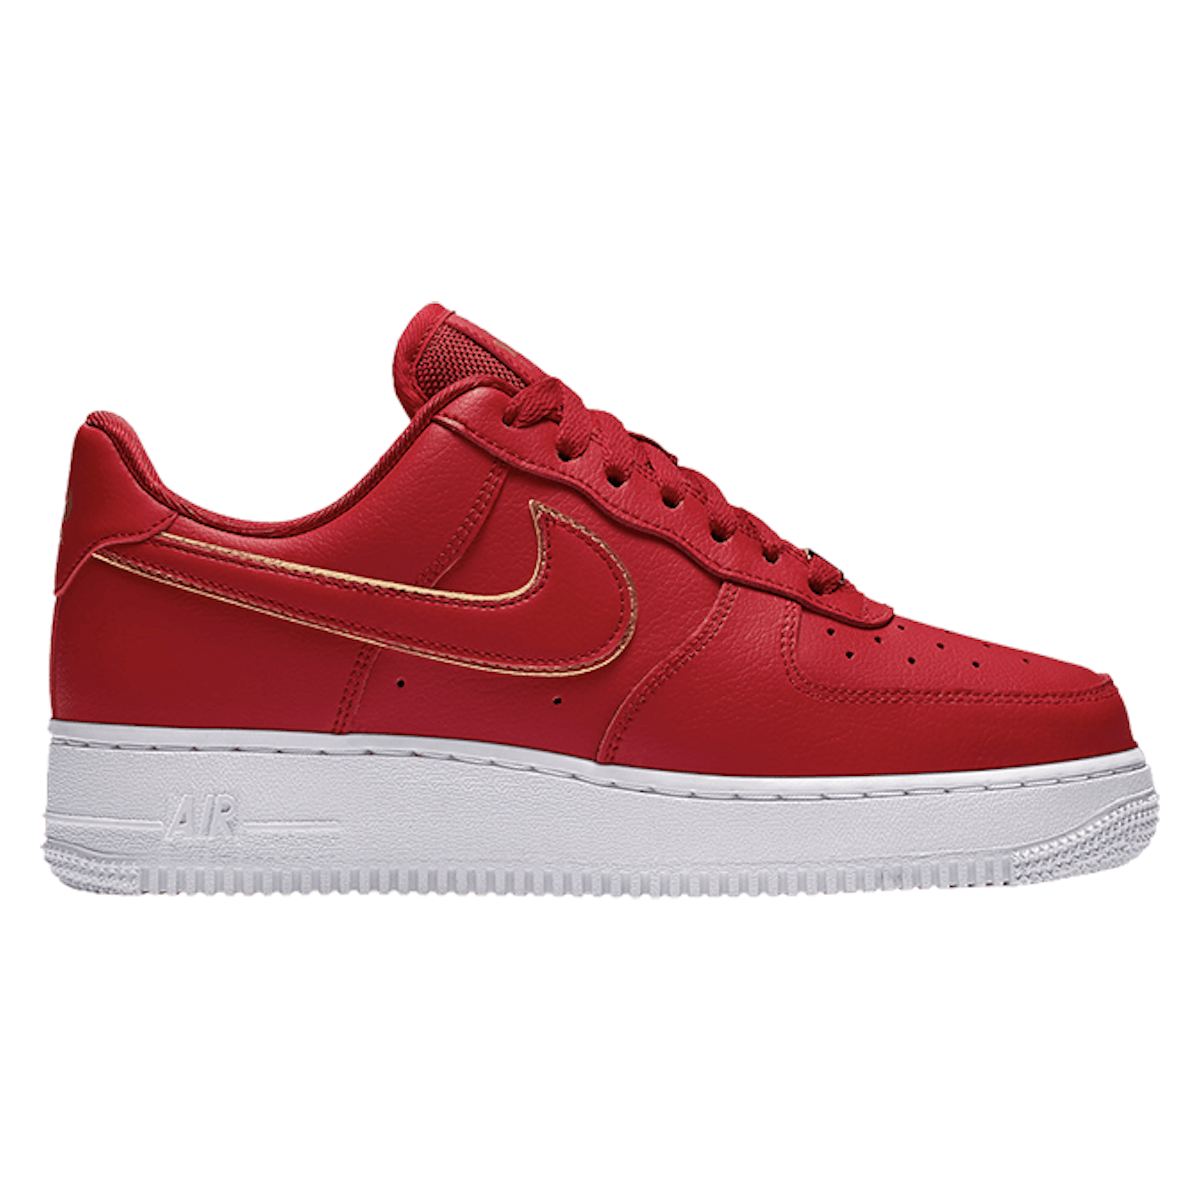 Nike Air Force 1 Low "Red Gold Swoosh"